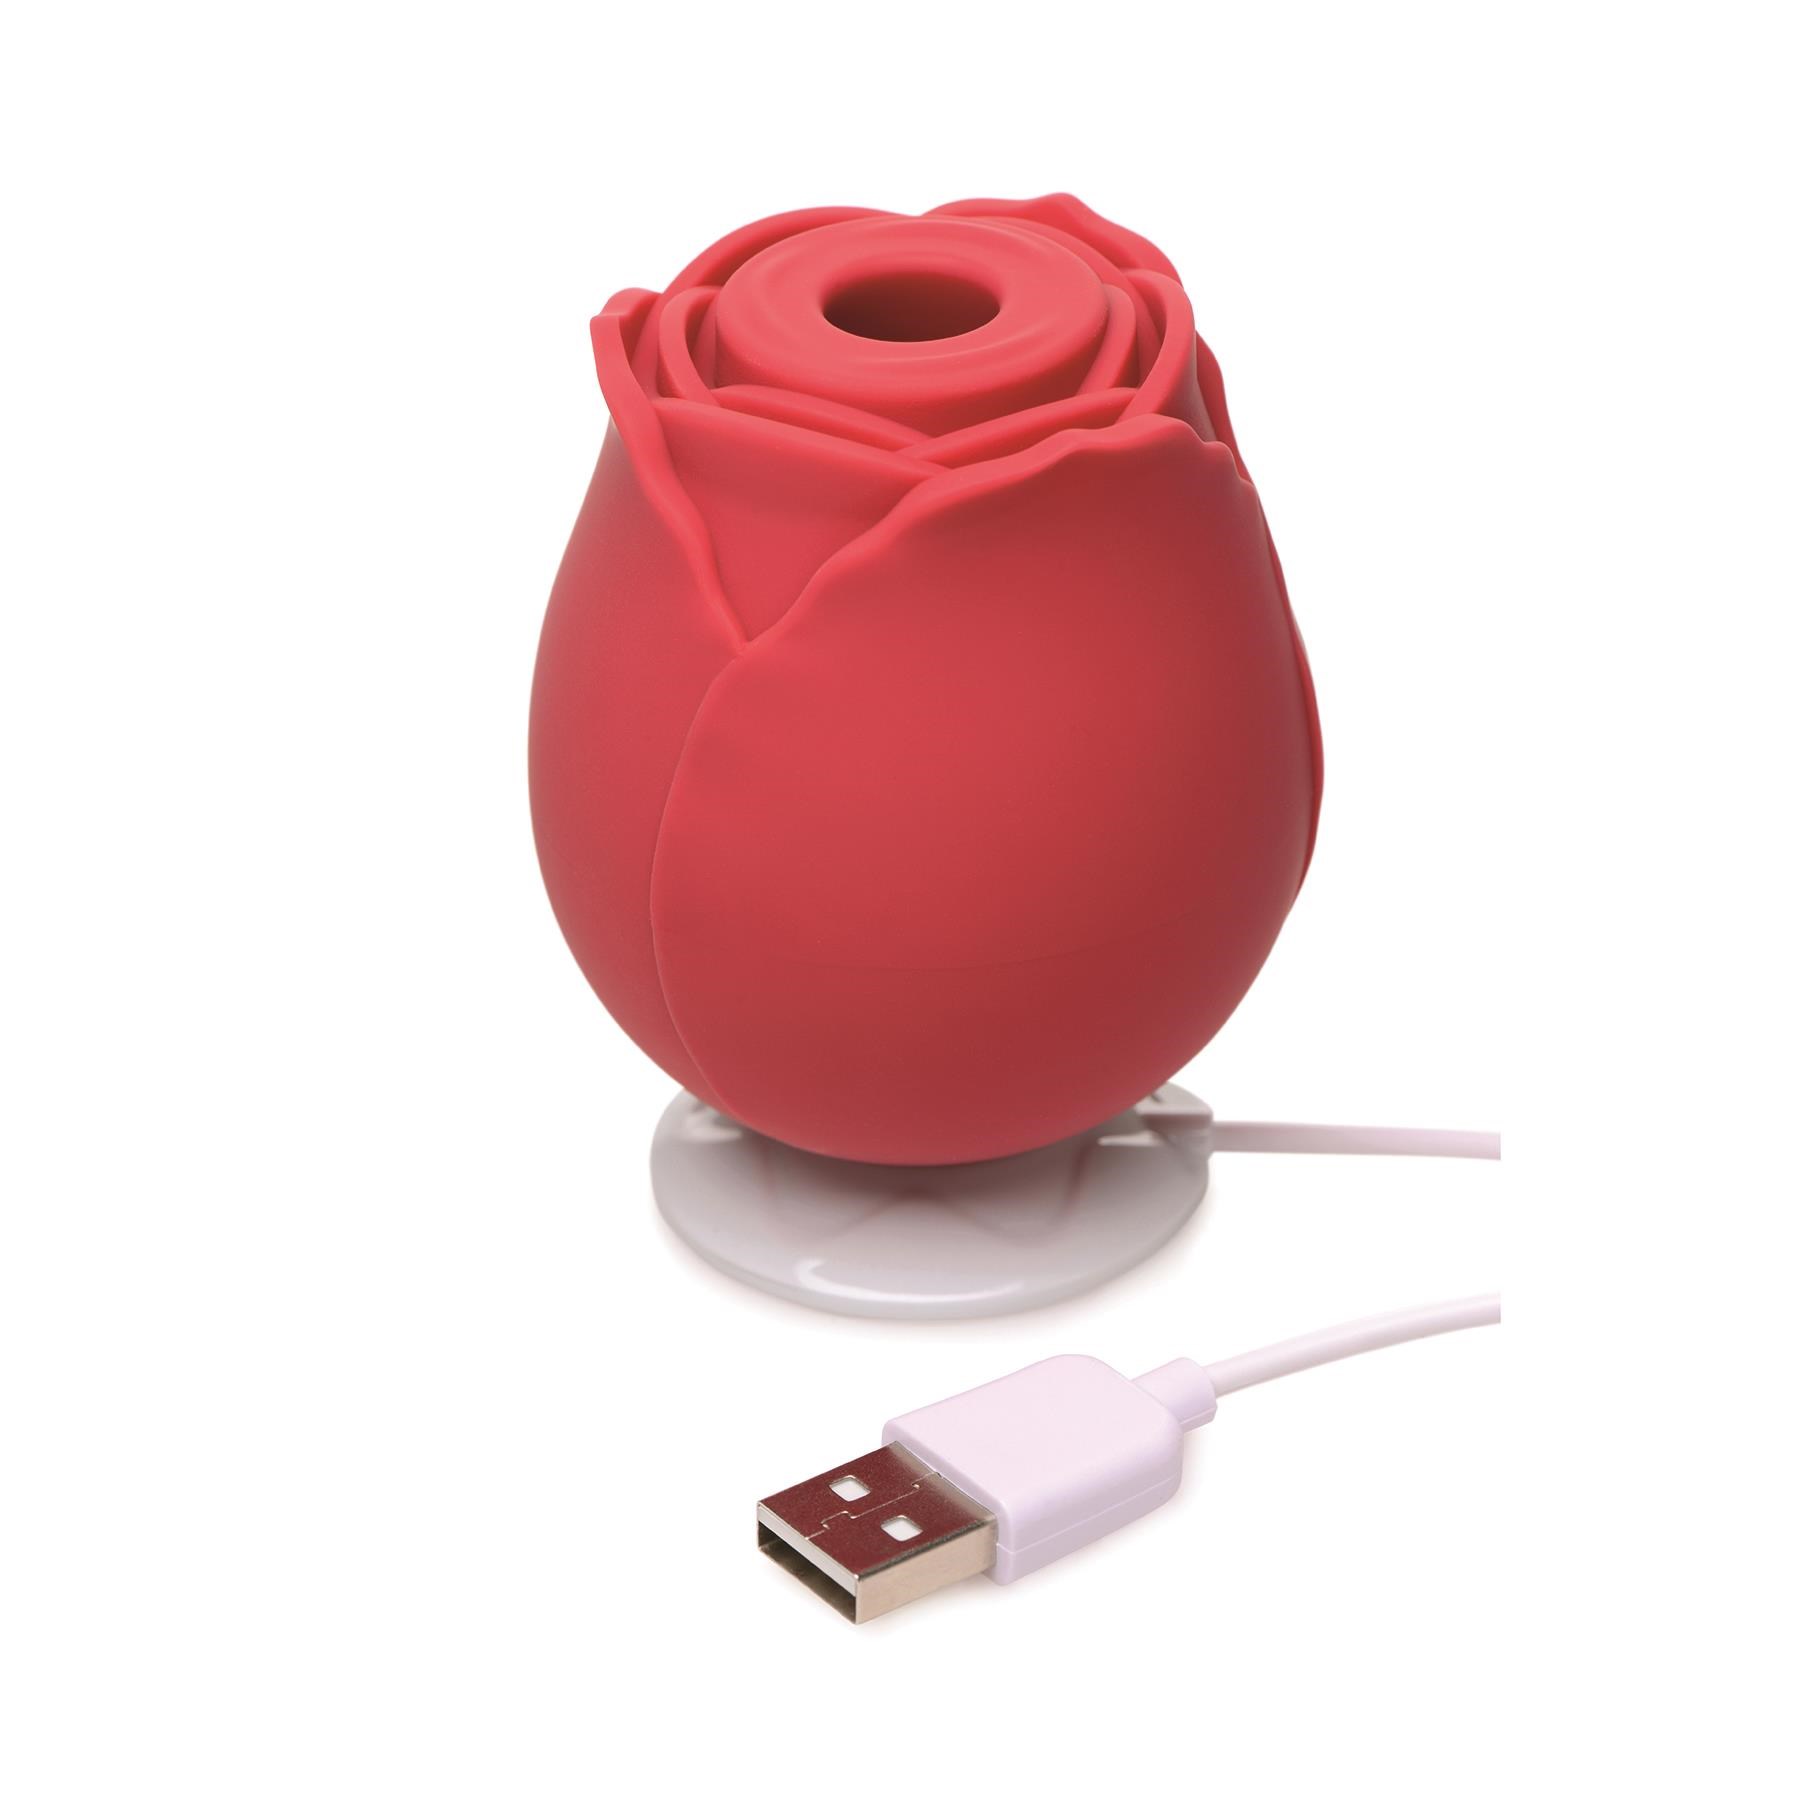 Bloomgasm Suction Rose Clitoral Stimulator Showing How to Charge - Red